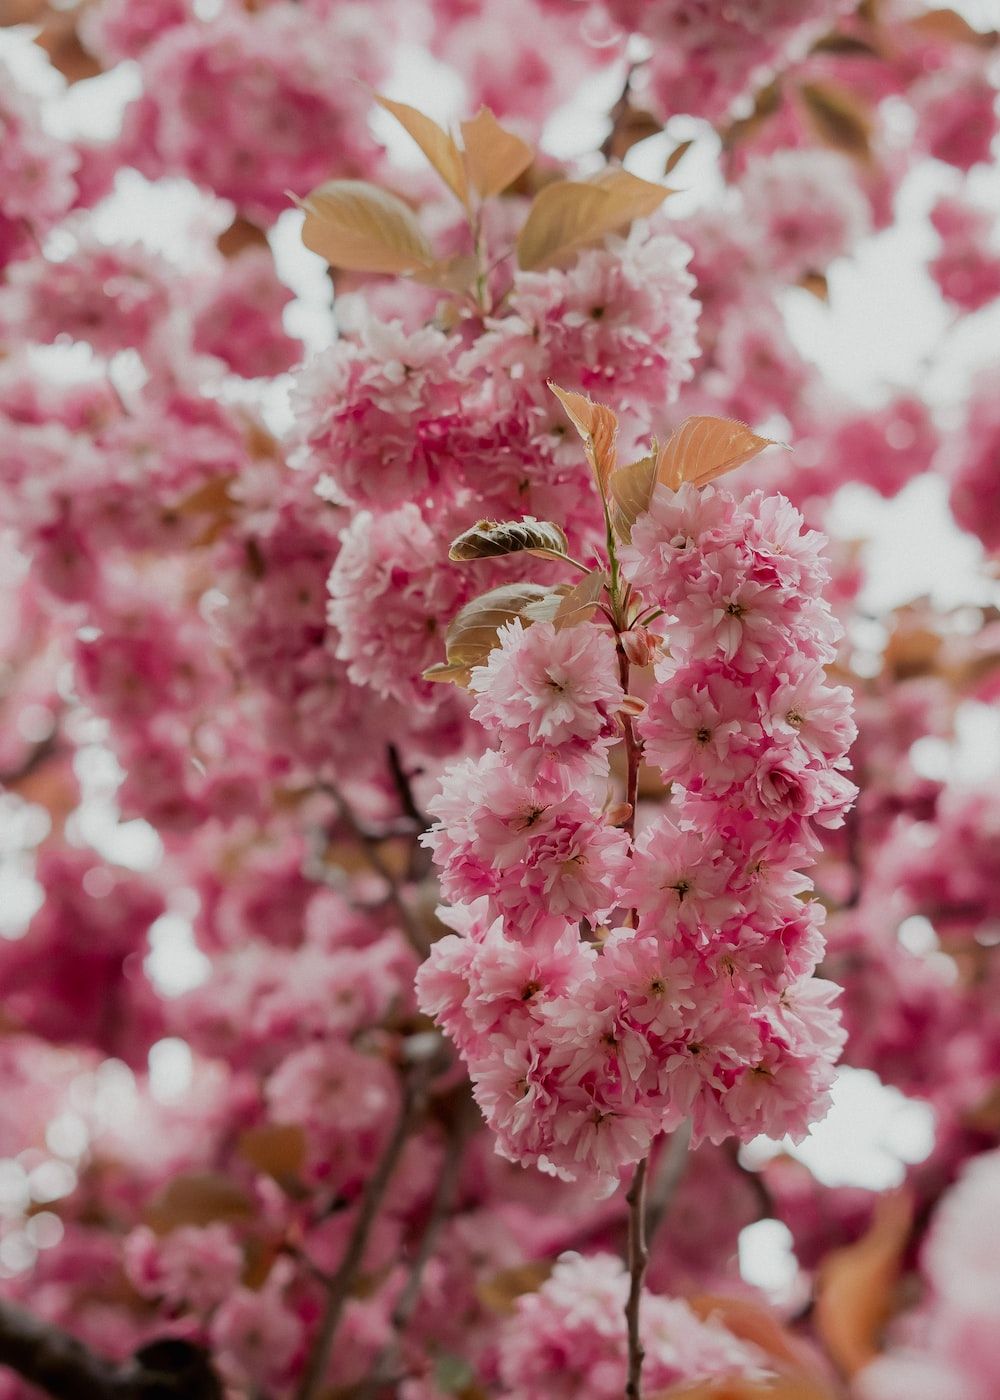 A tree with pink flowers on it - Spring